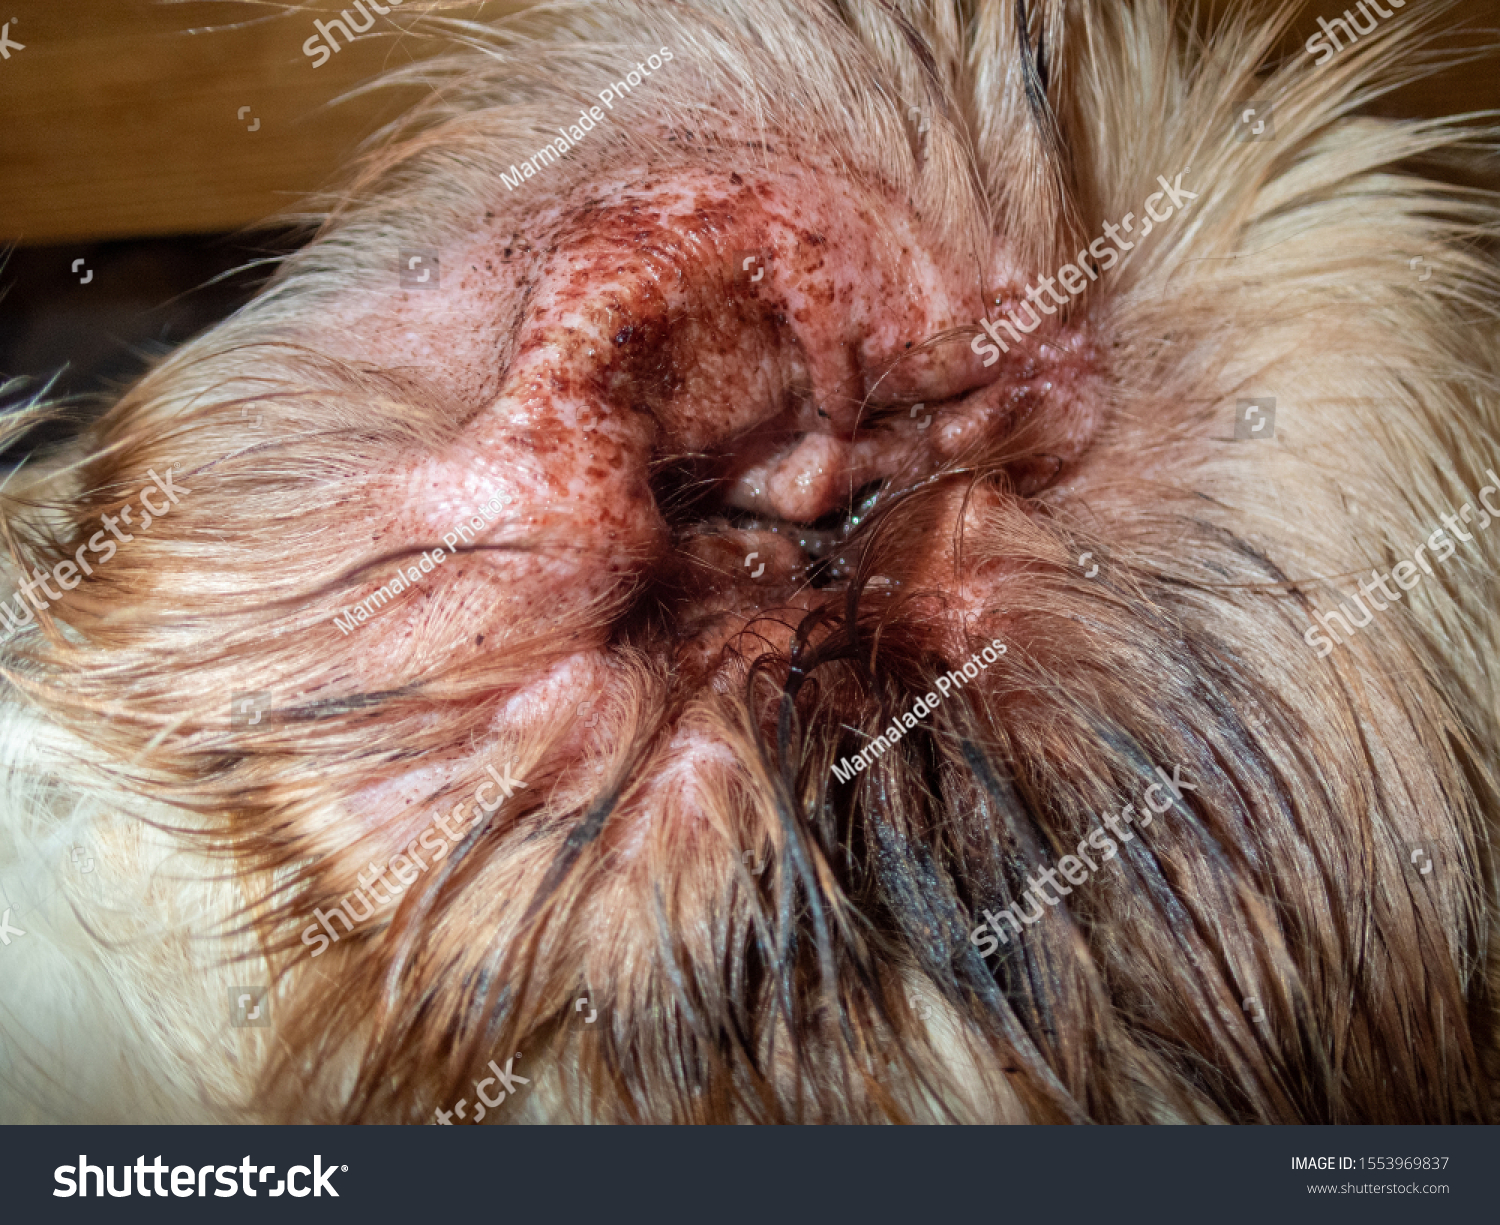 ear mite infection in dogs